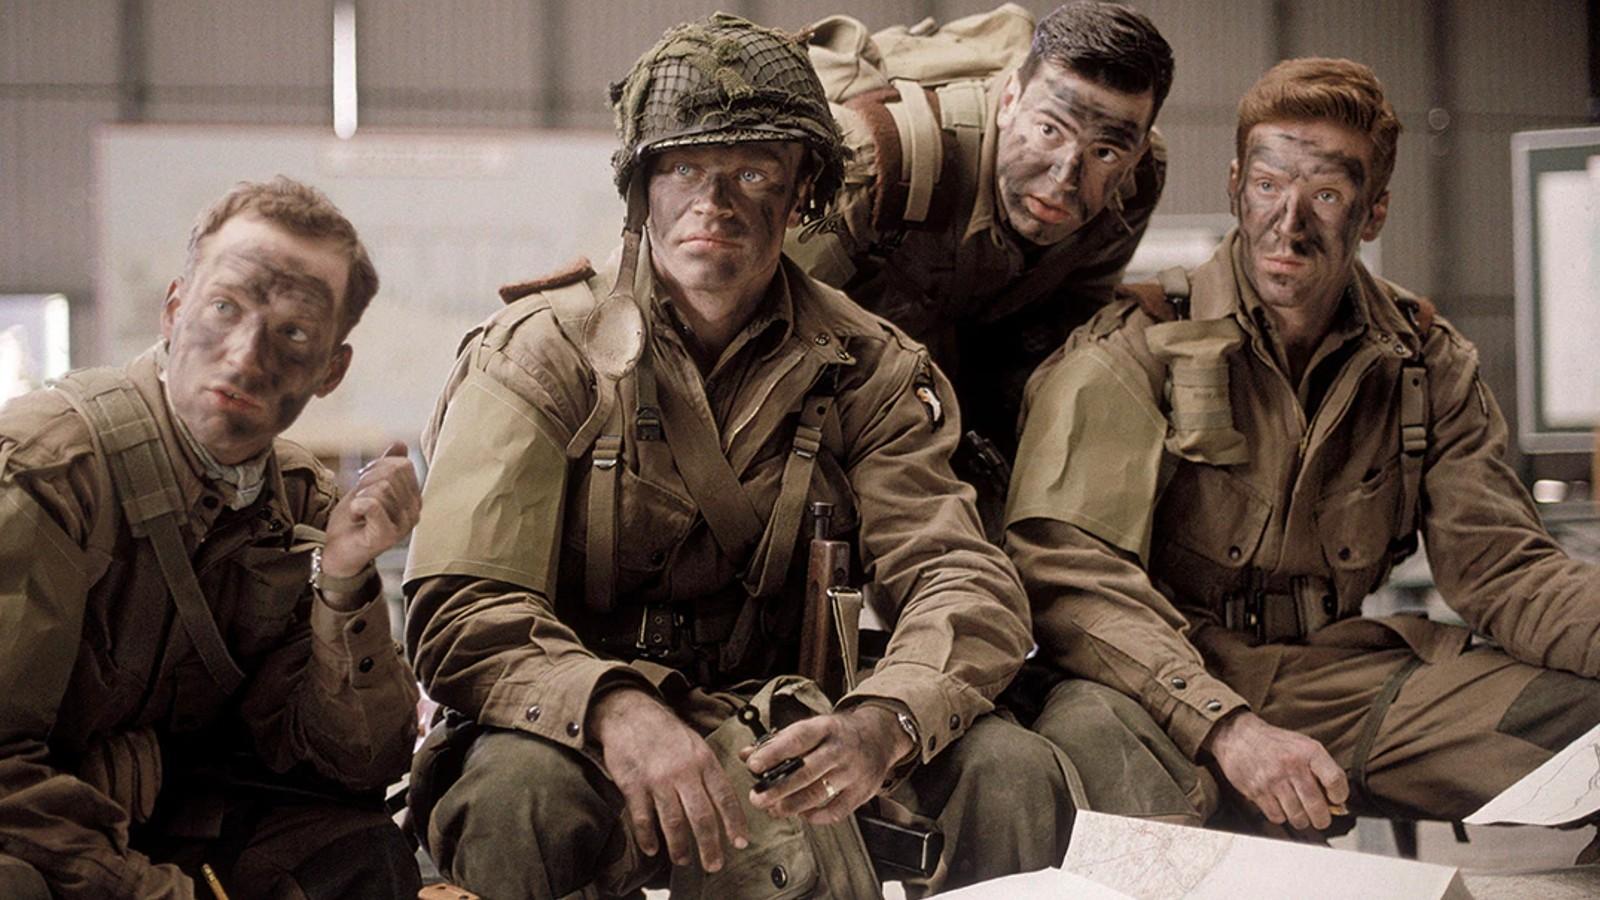 The cast of Band of Brothers